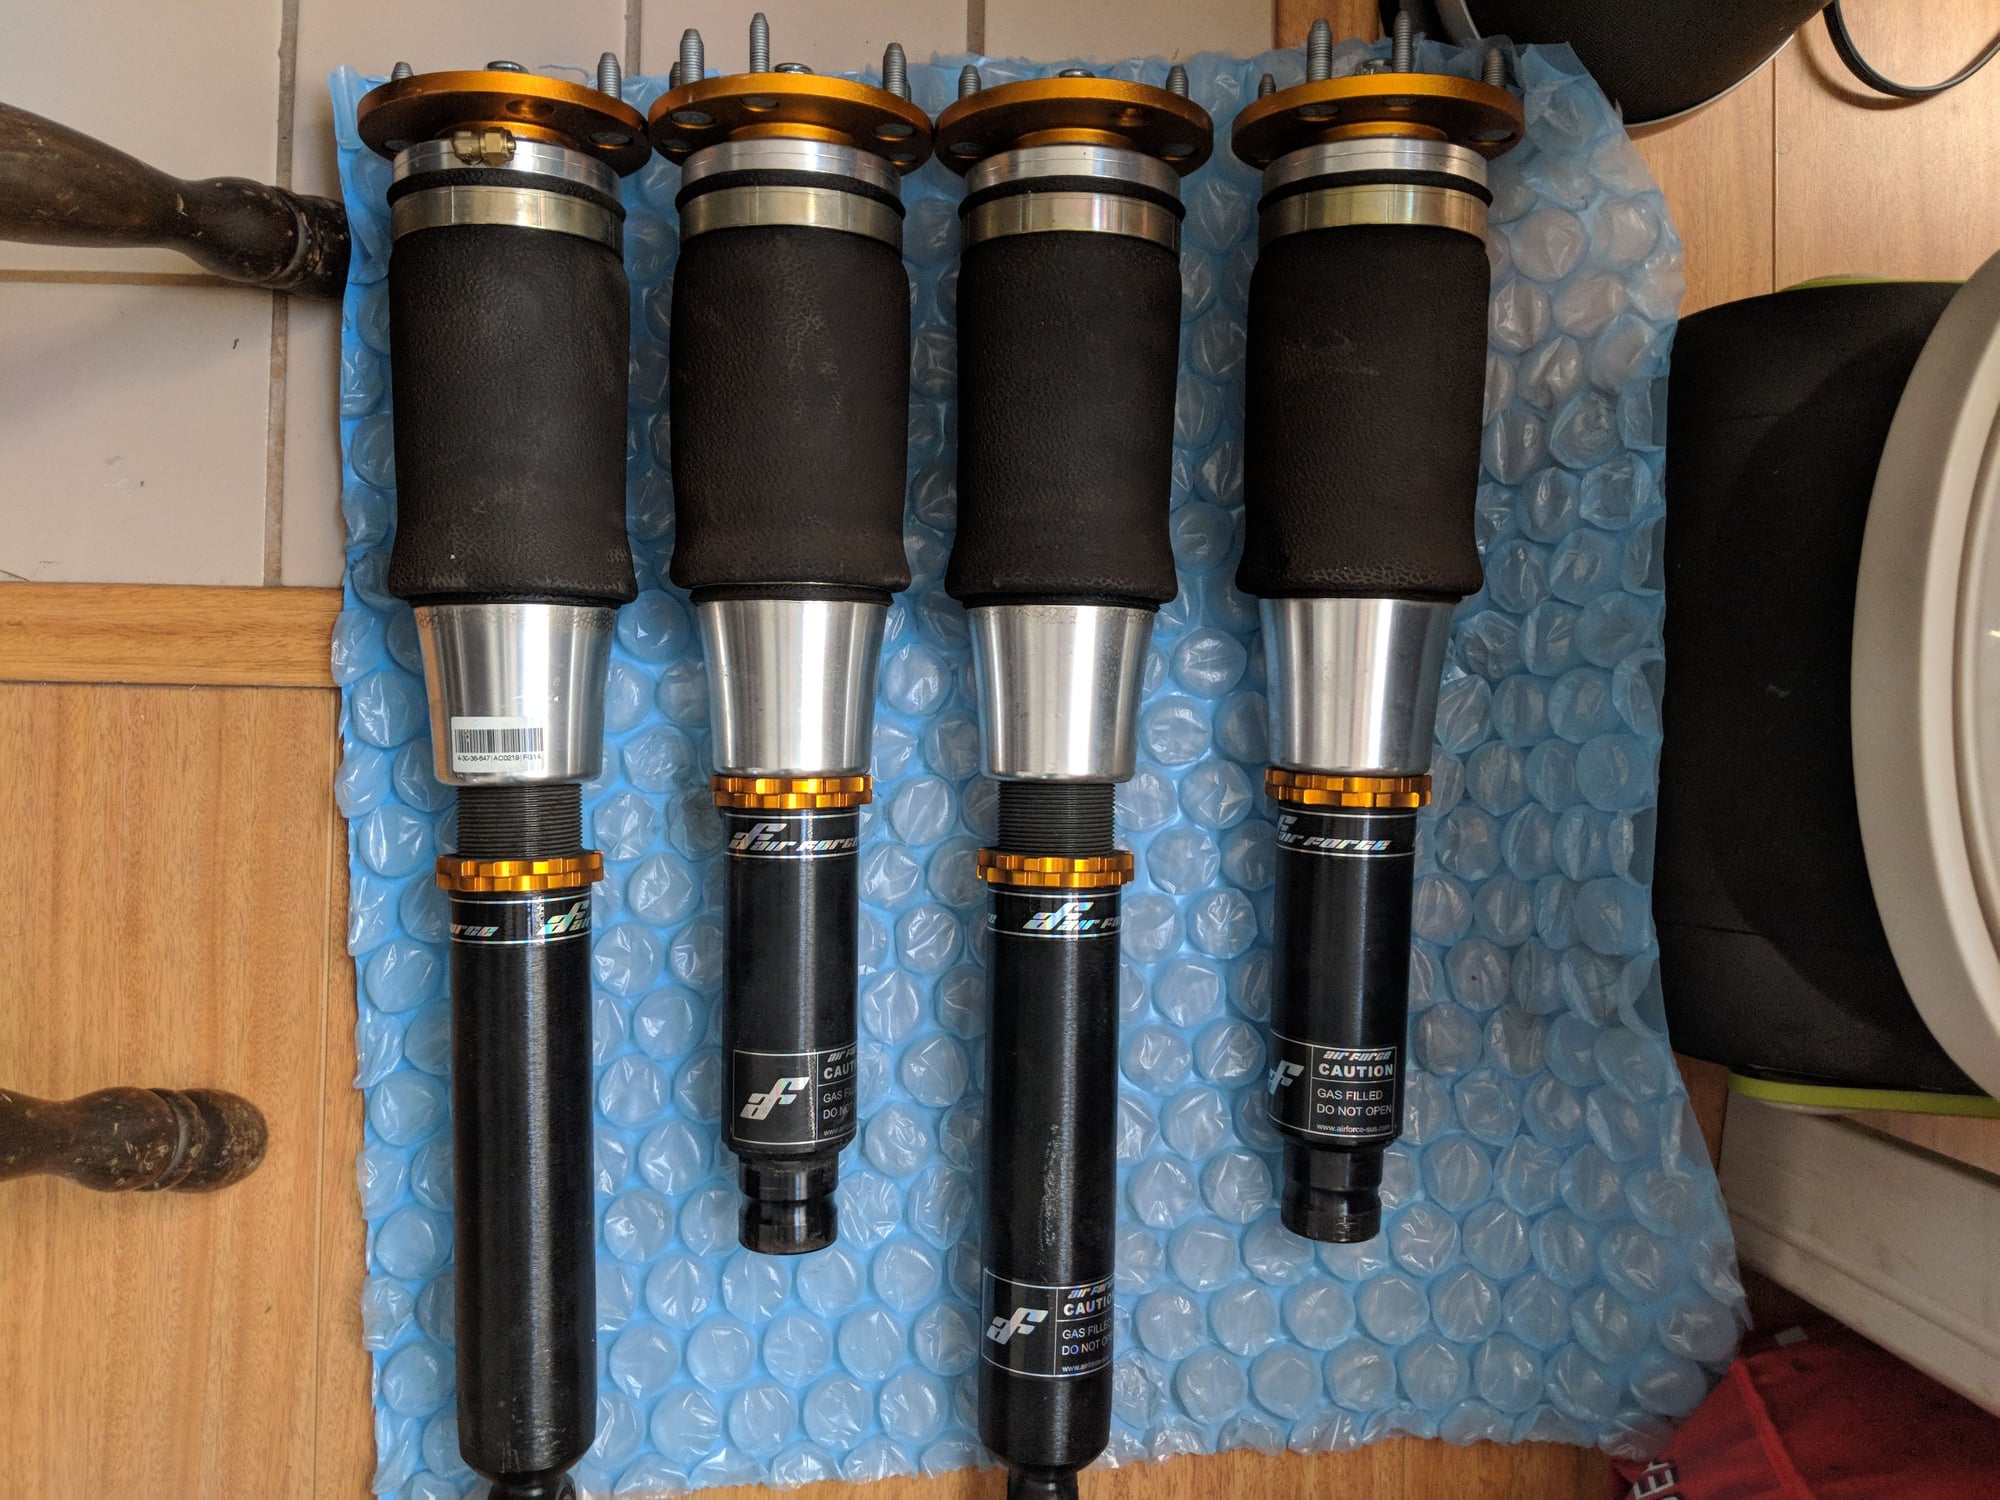 2008 Acura TL - AirForce 1/4" Struts (Sleeves) for 04-08 TL - Steering/Suspension - $1,050 - San Diego, CA 92128, United States